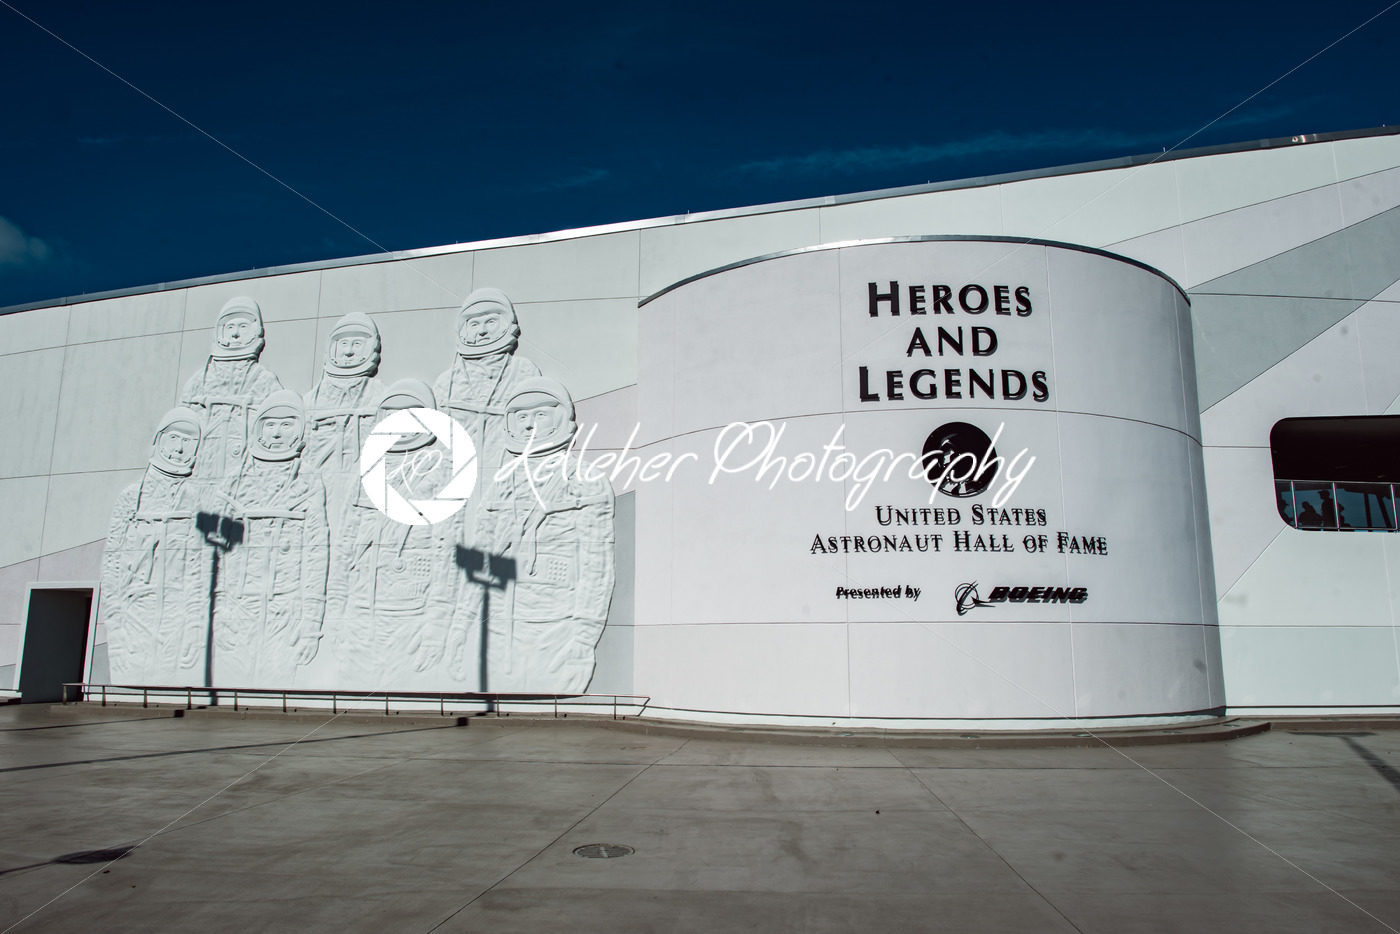 Cape Canaveral, Florida – August 13, 2018: Heroes and Legends Astronaut Hall of Fame at NASA Kennedy Space Center - Kelleher Photography Store